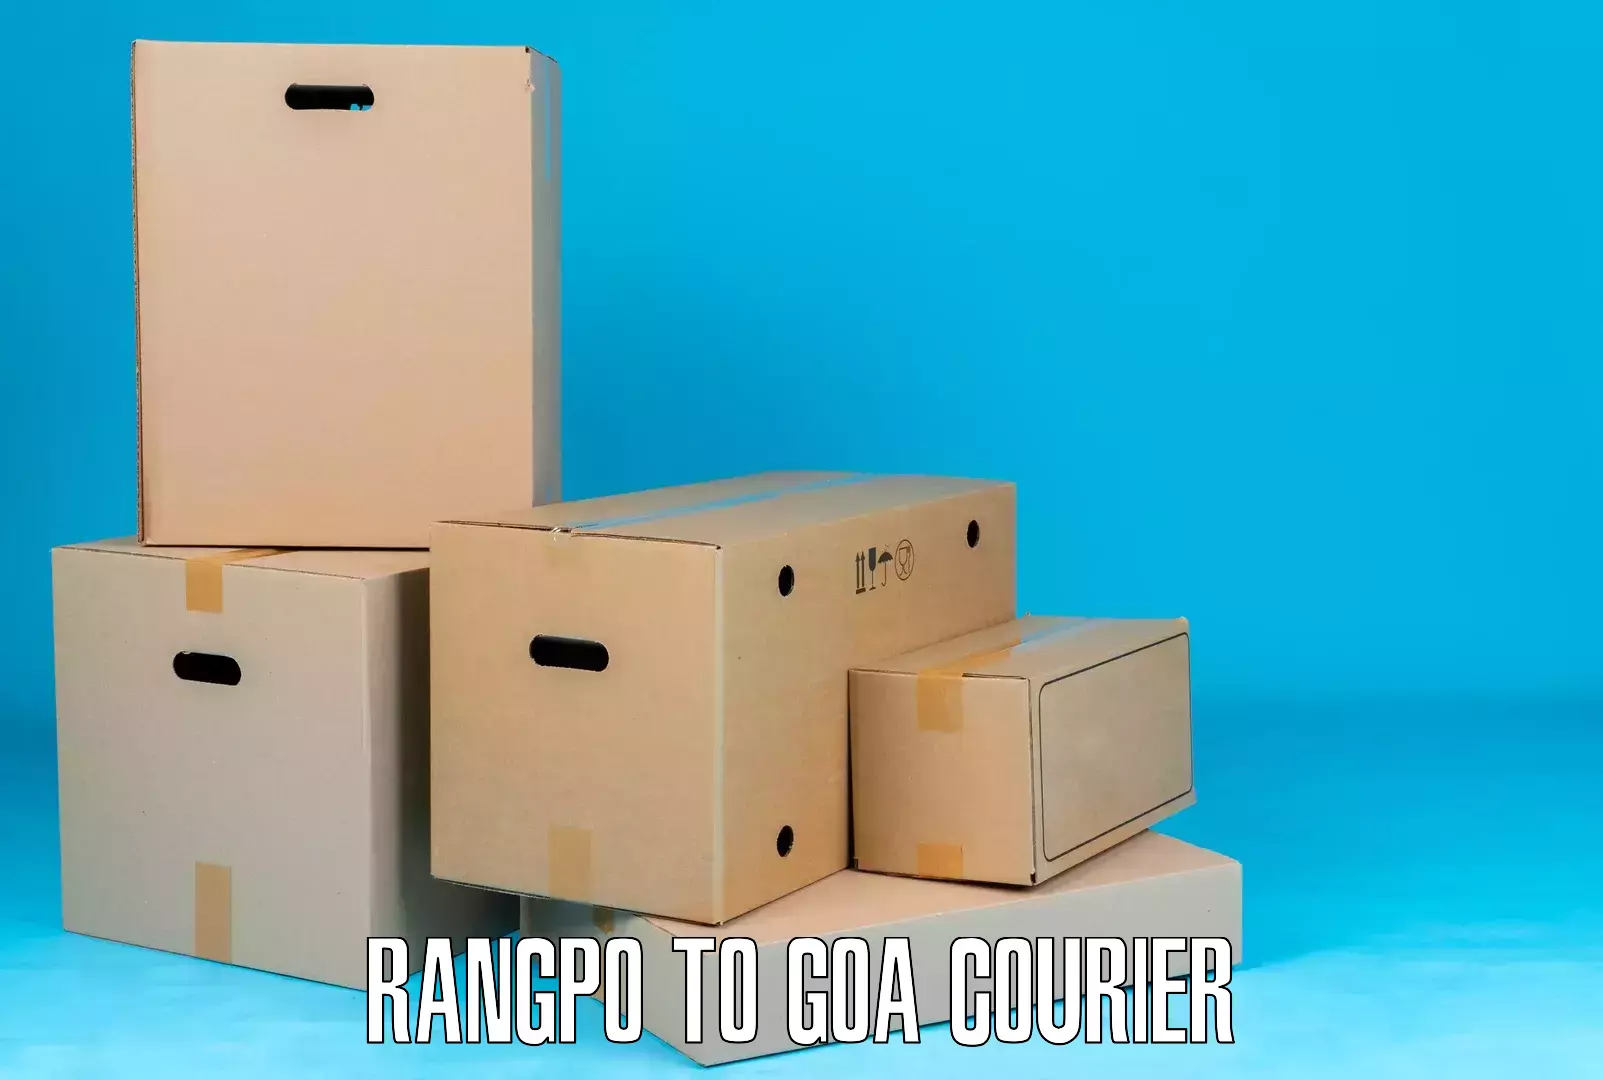 Express package services Rangpo to Margao